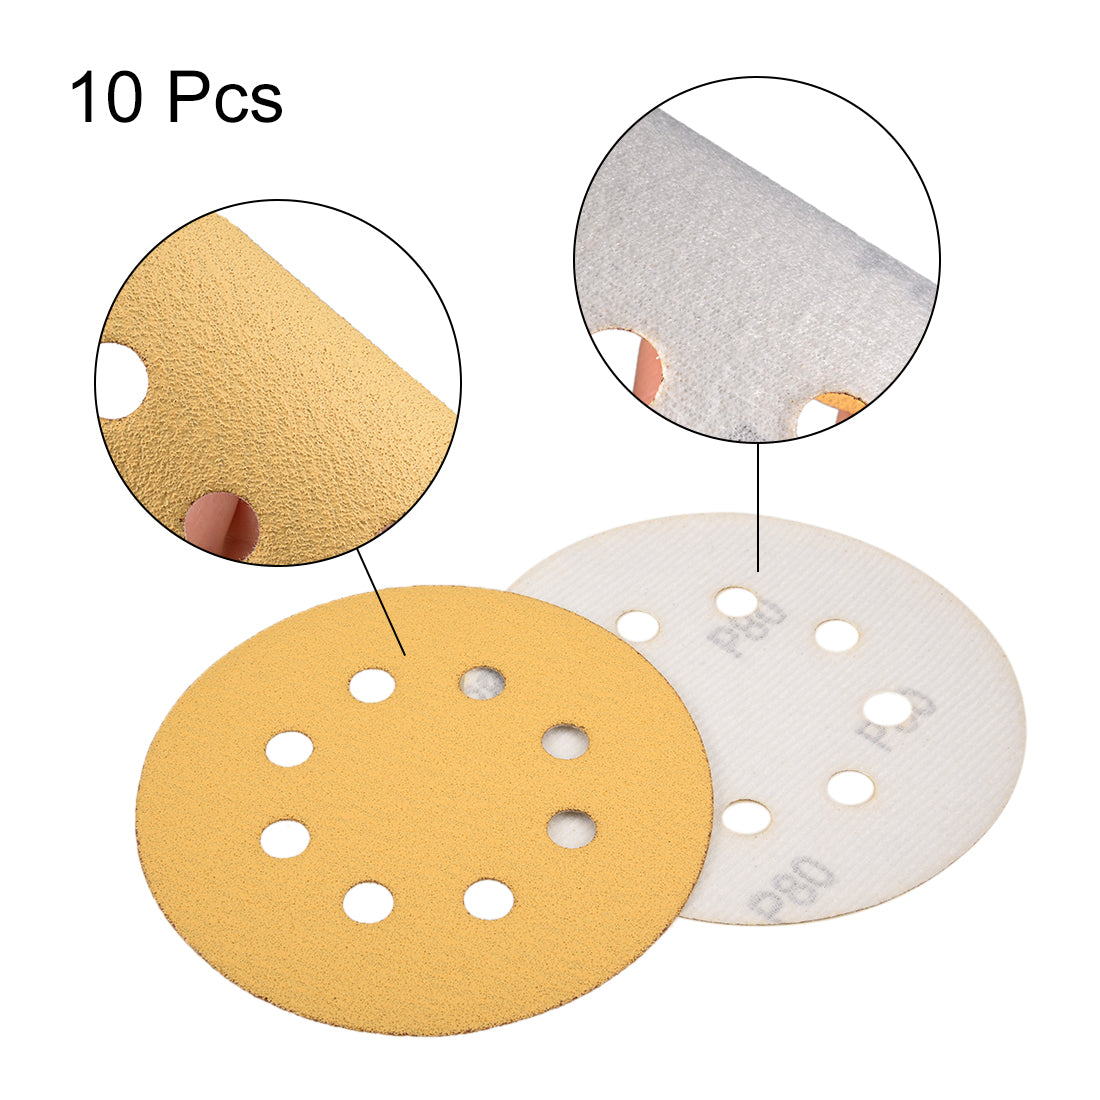 uxcell Uxcell Holes Grits Hook and Loop Sanding Discs for Sander